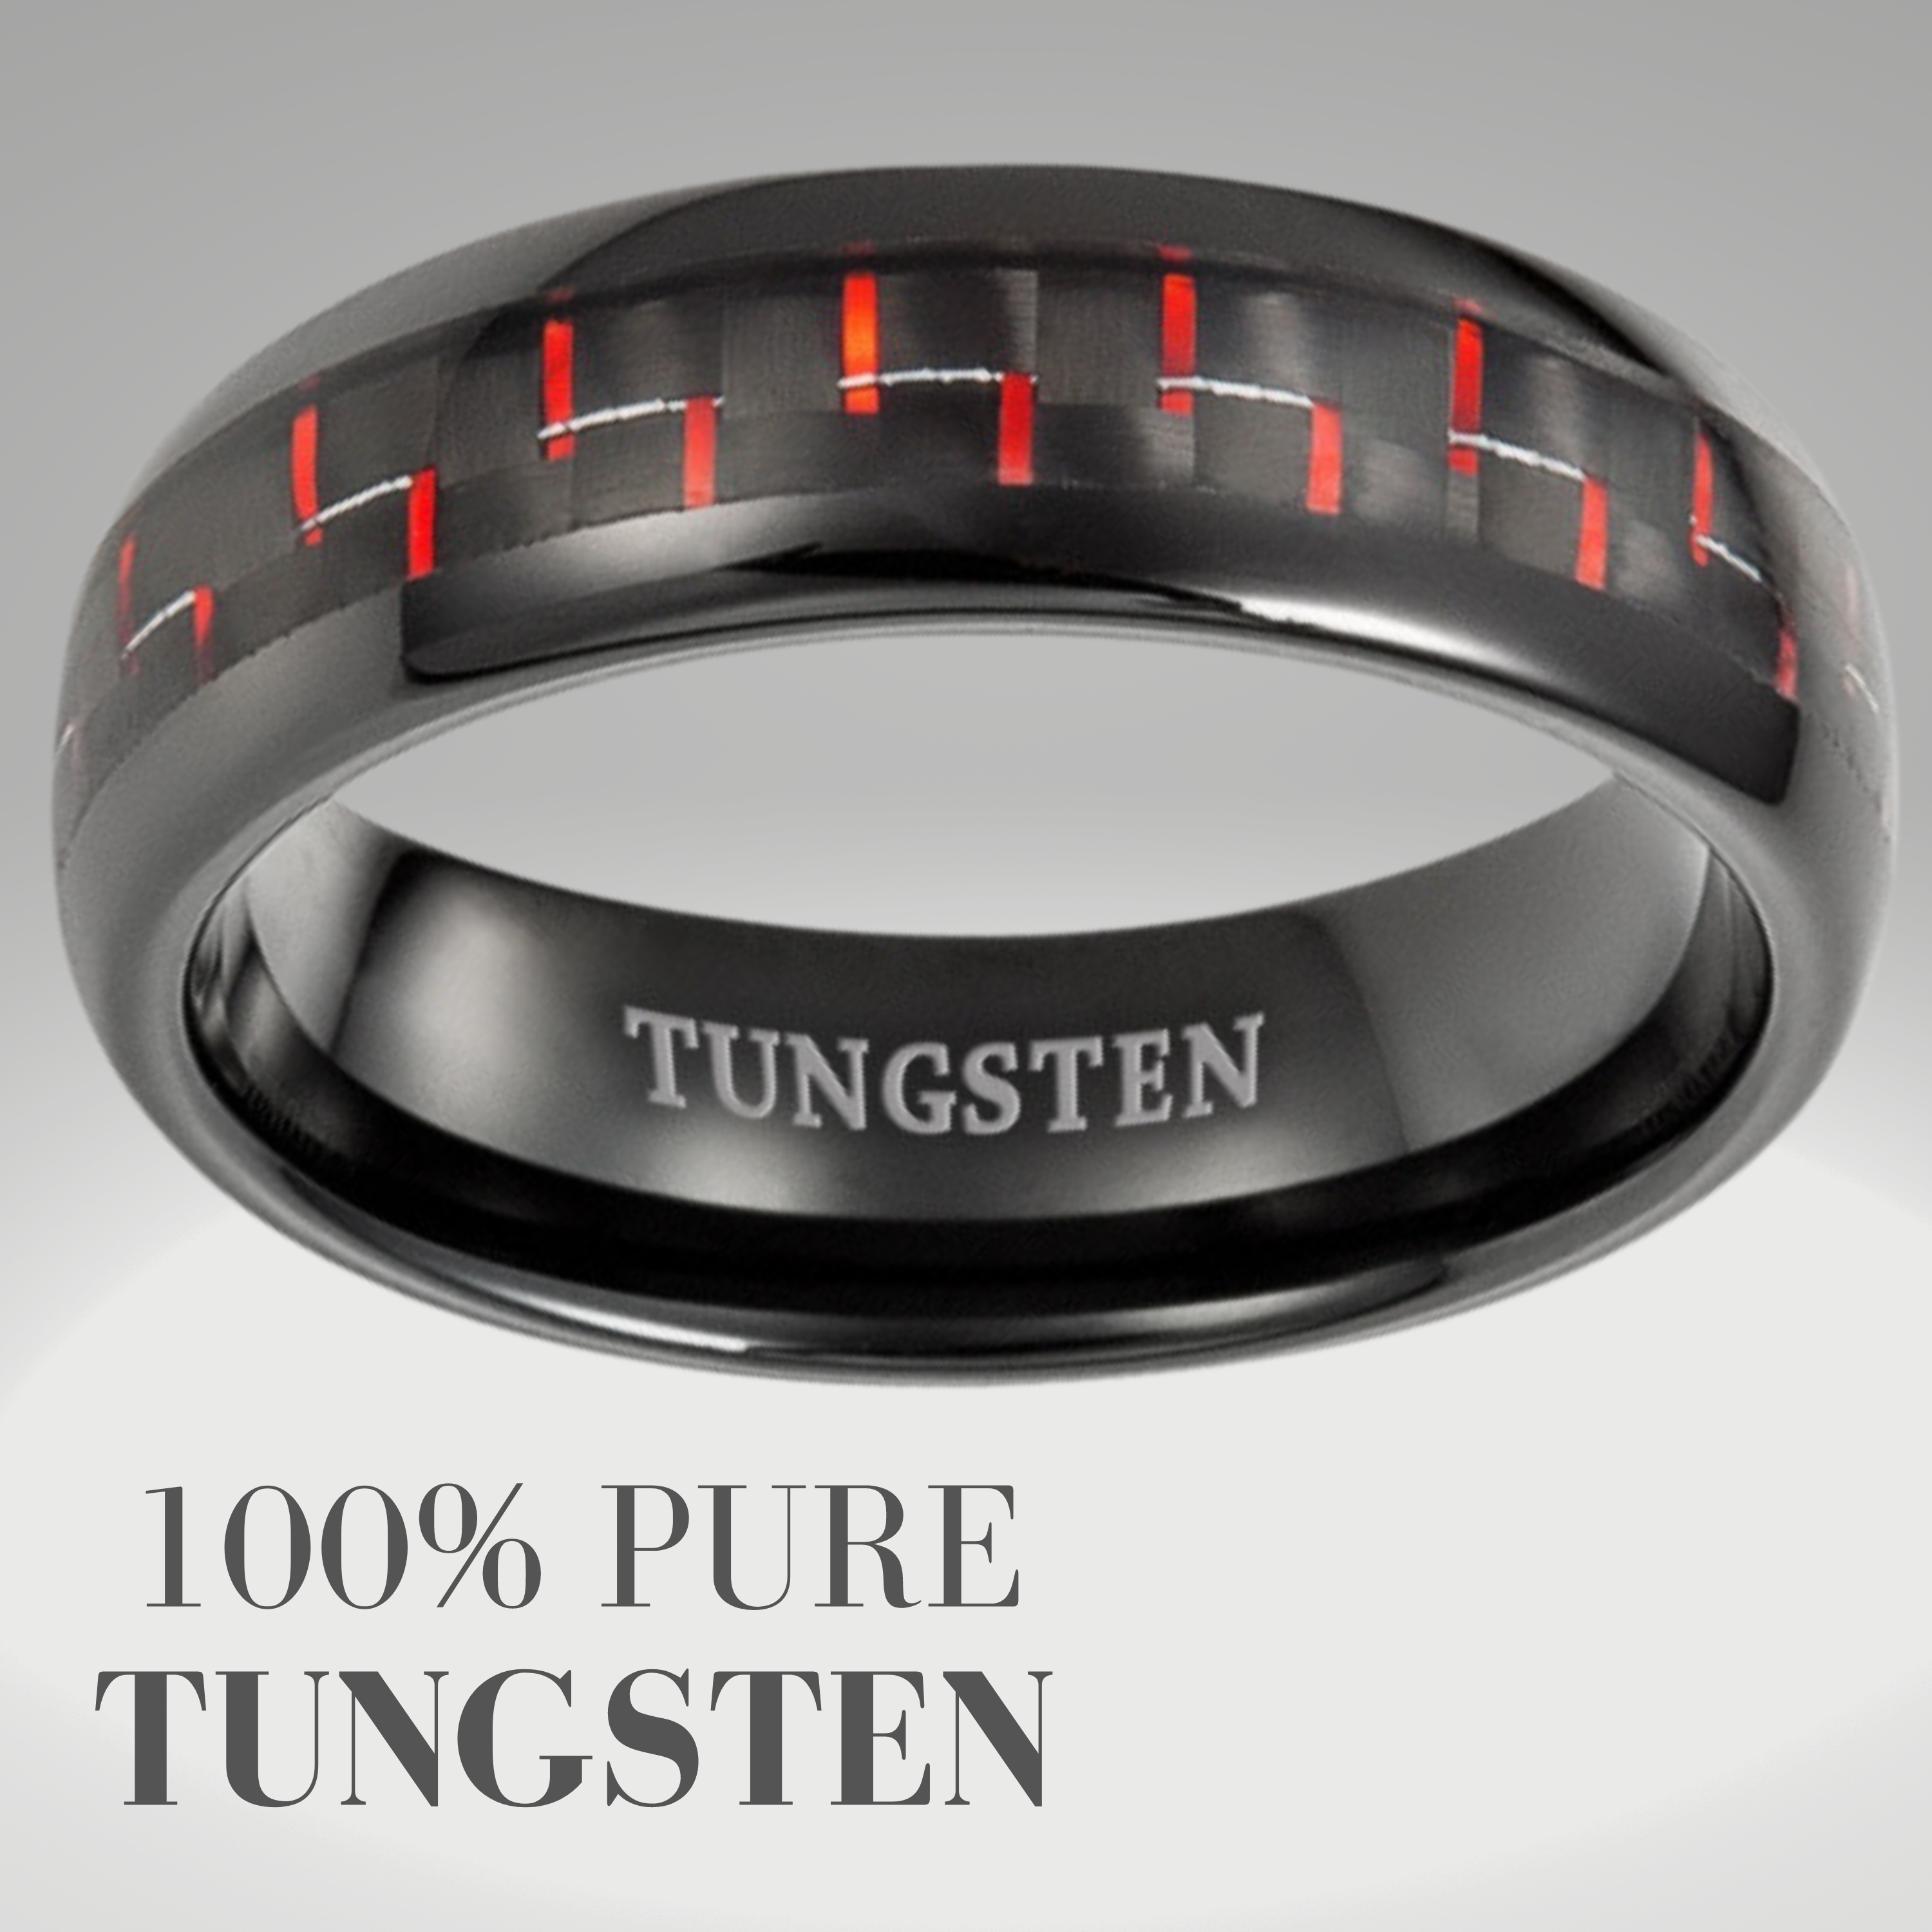 Men's 7mm Tungsten Red Carbon Fibre Ring